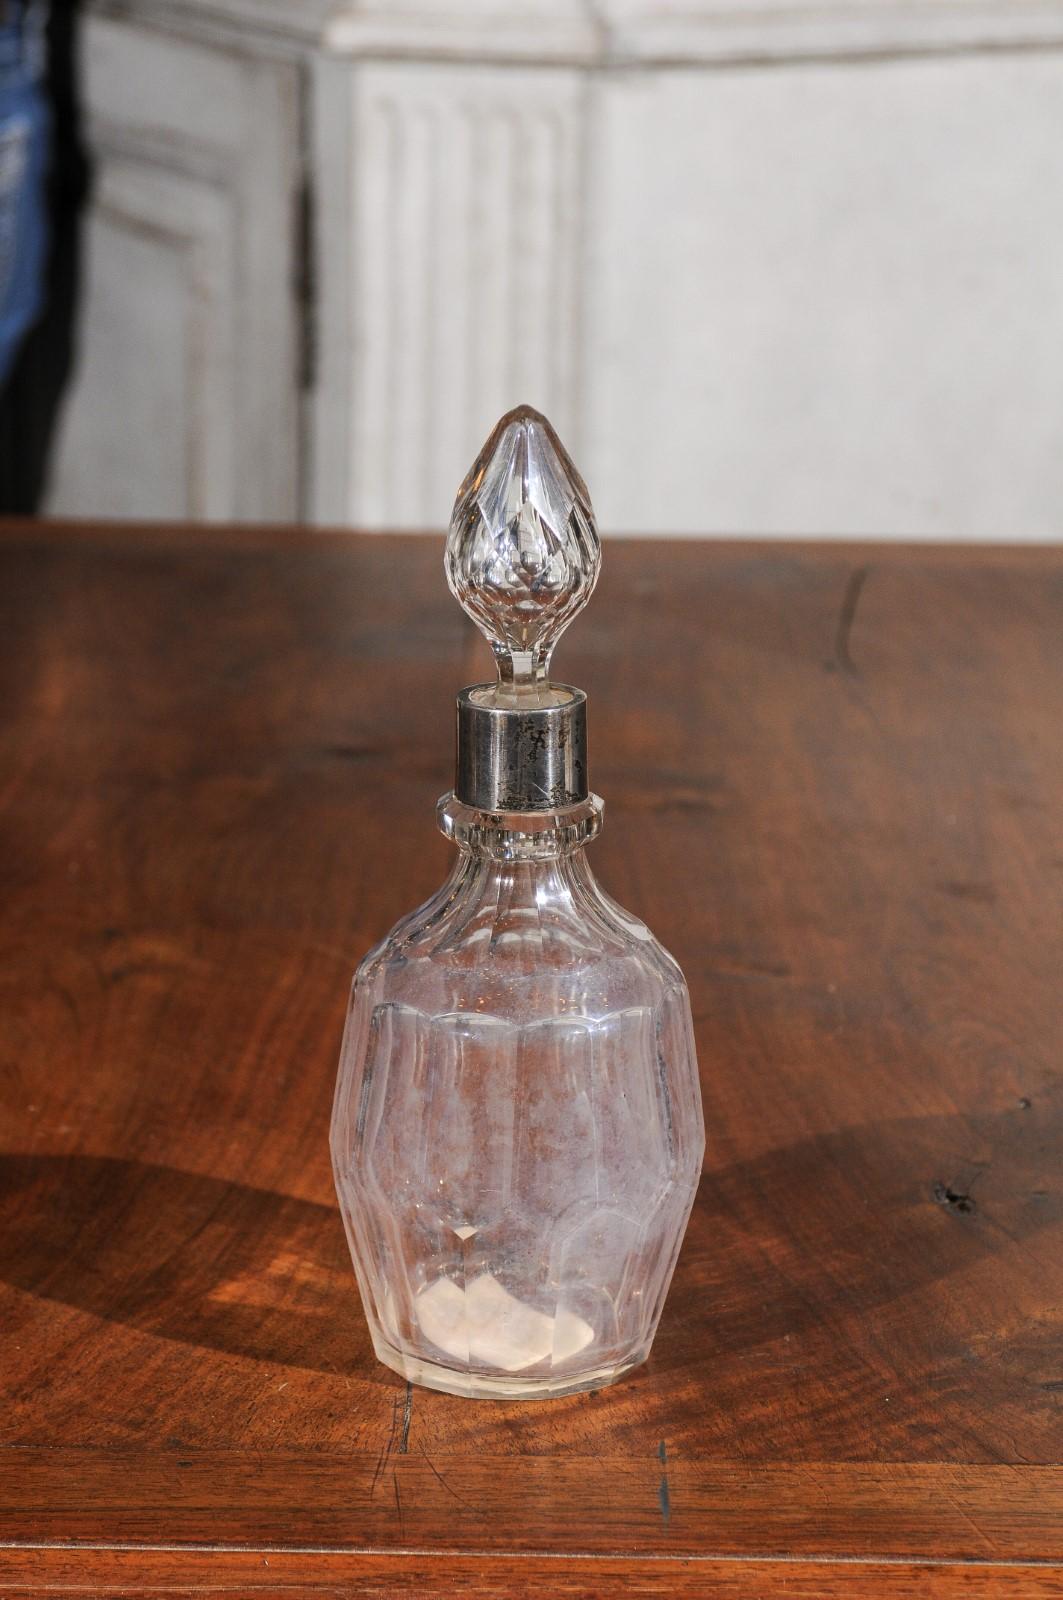 An English crystal and silver toiletry bottle from the early 19th century, with stopper. Born in England during the second decade of the 19th century, this toiletry bottle features a crystal faceted body, accented with a circular silver neck. Topped